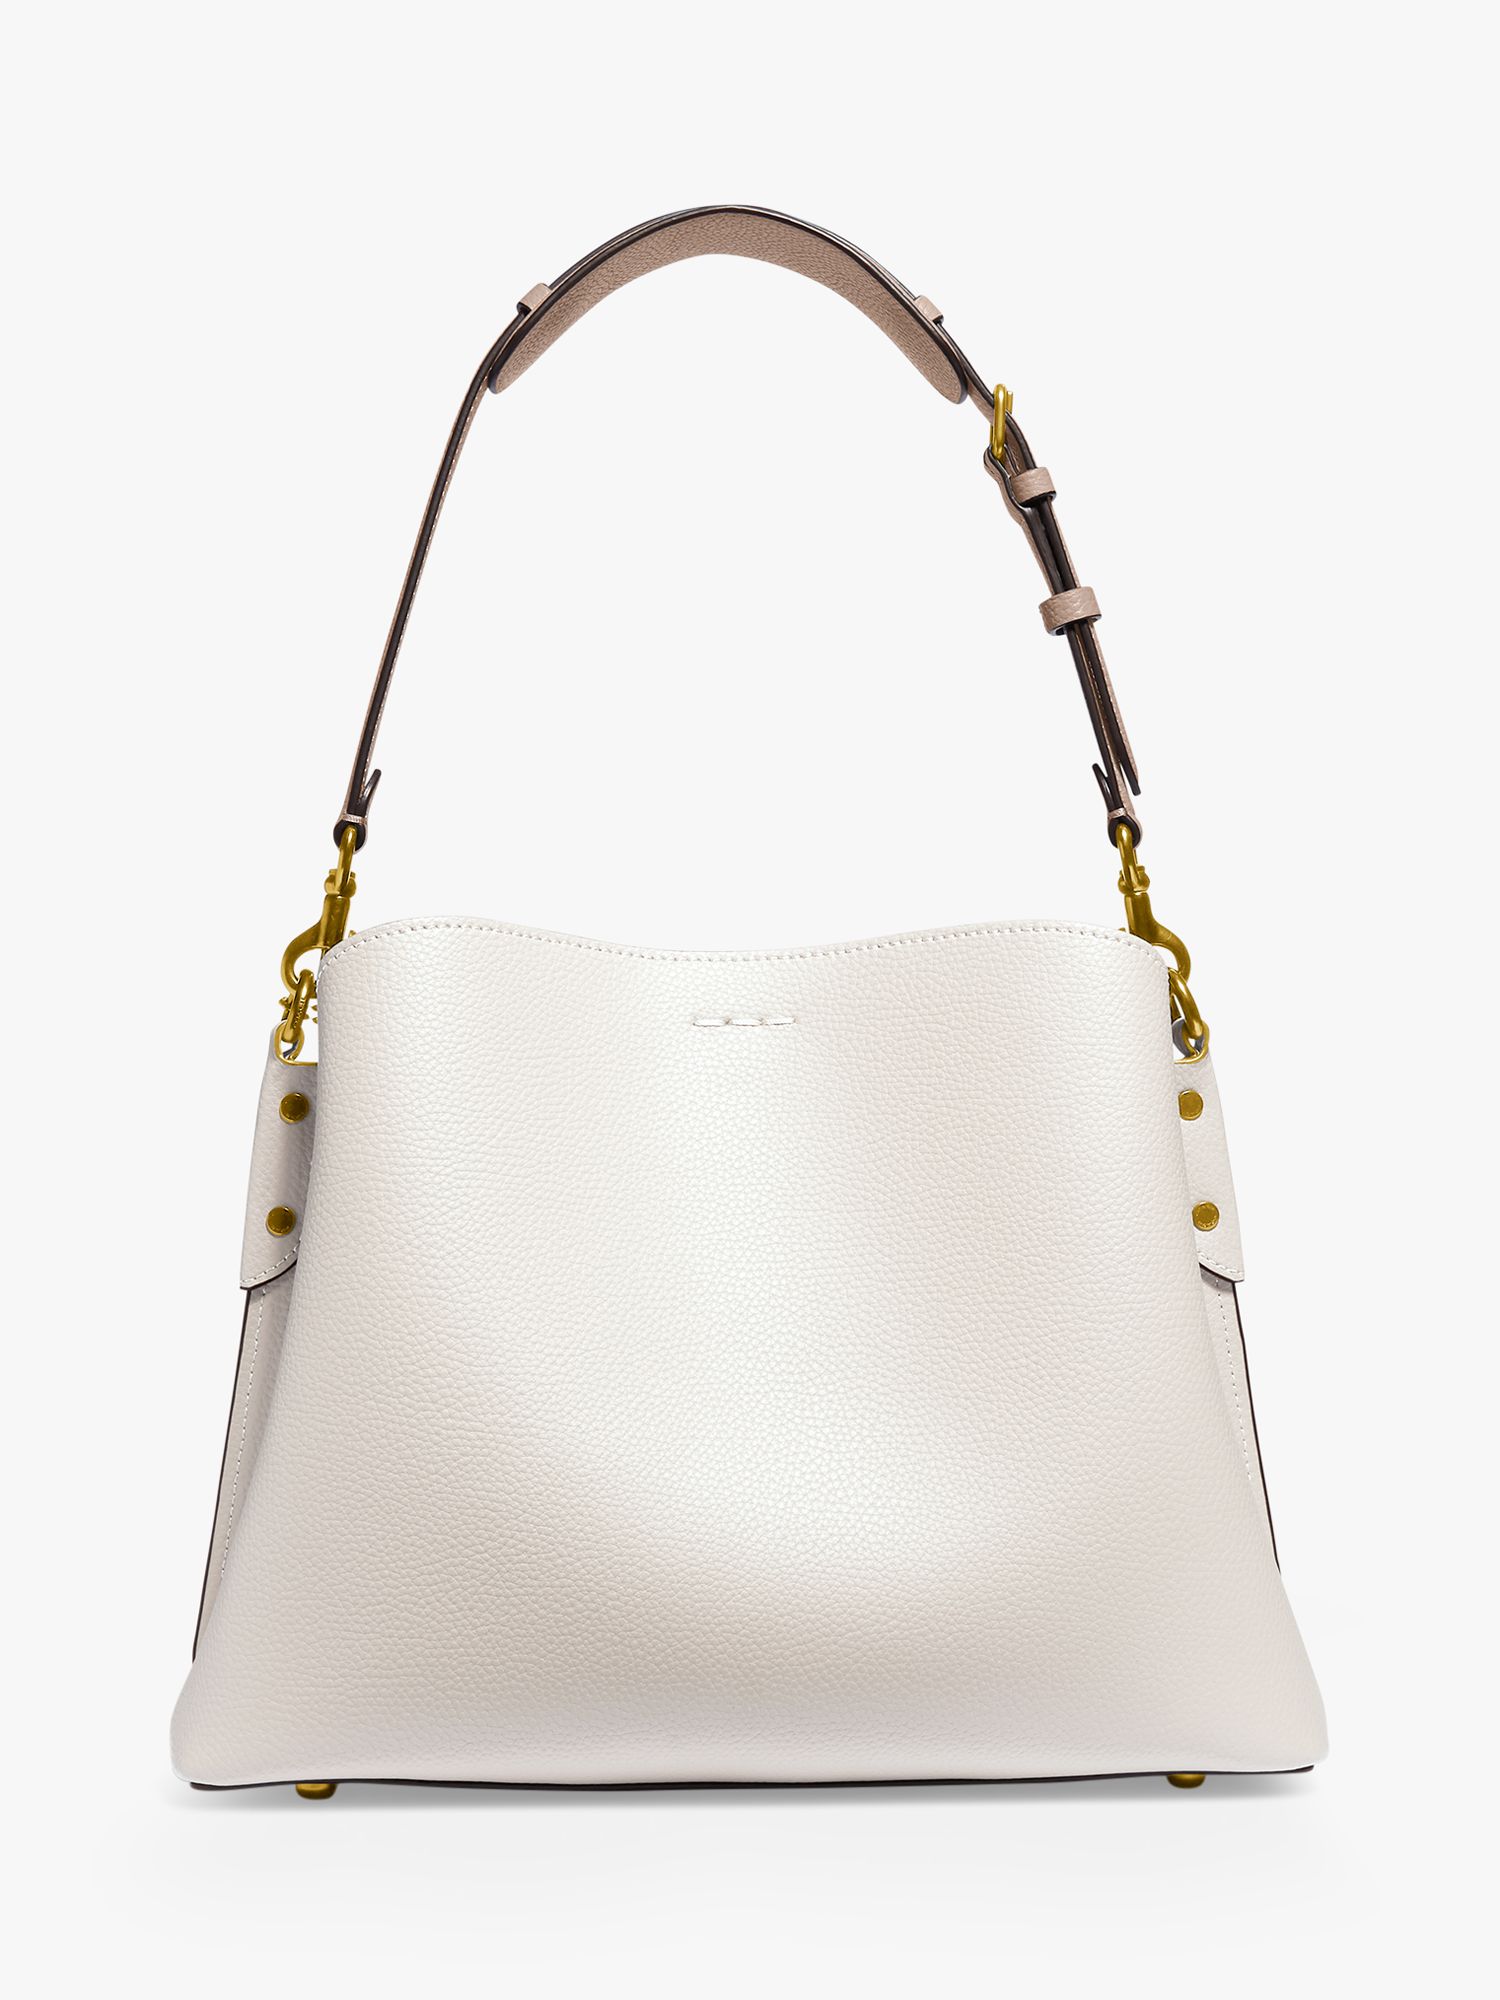 Coach Willow Leather Shoulder Bag, Chalk at John Lewis & Partners